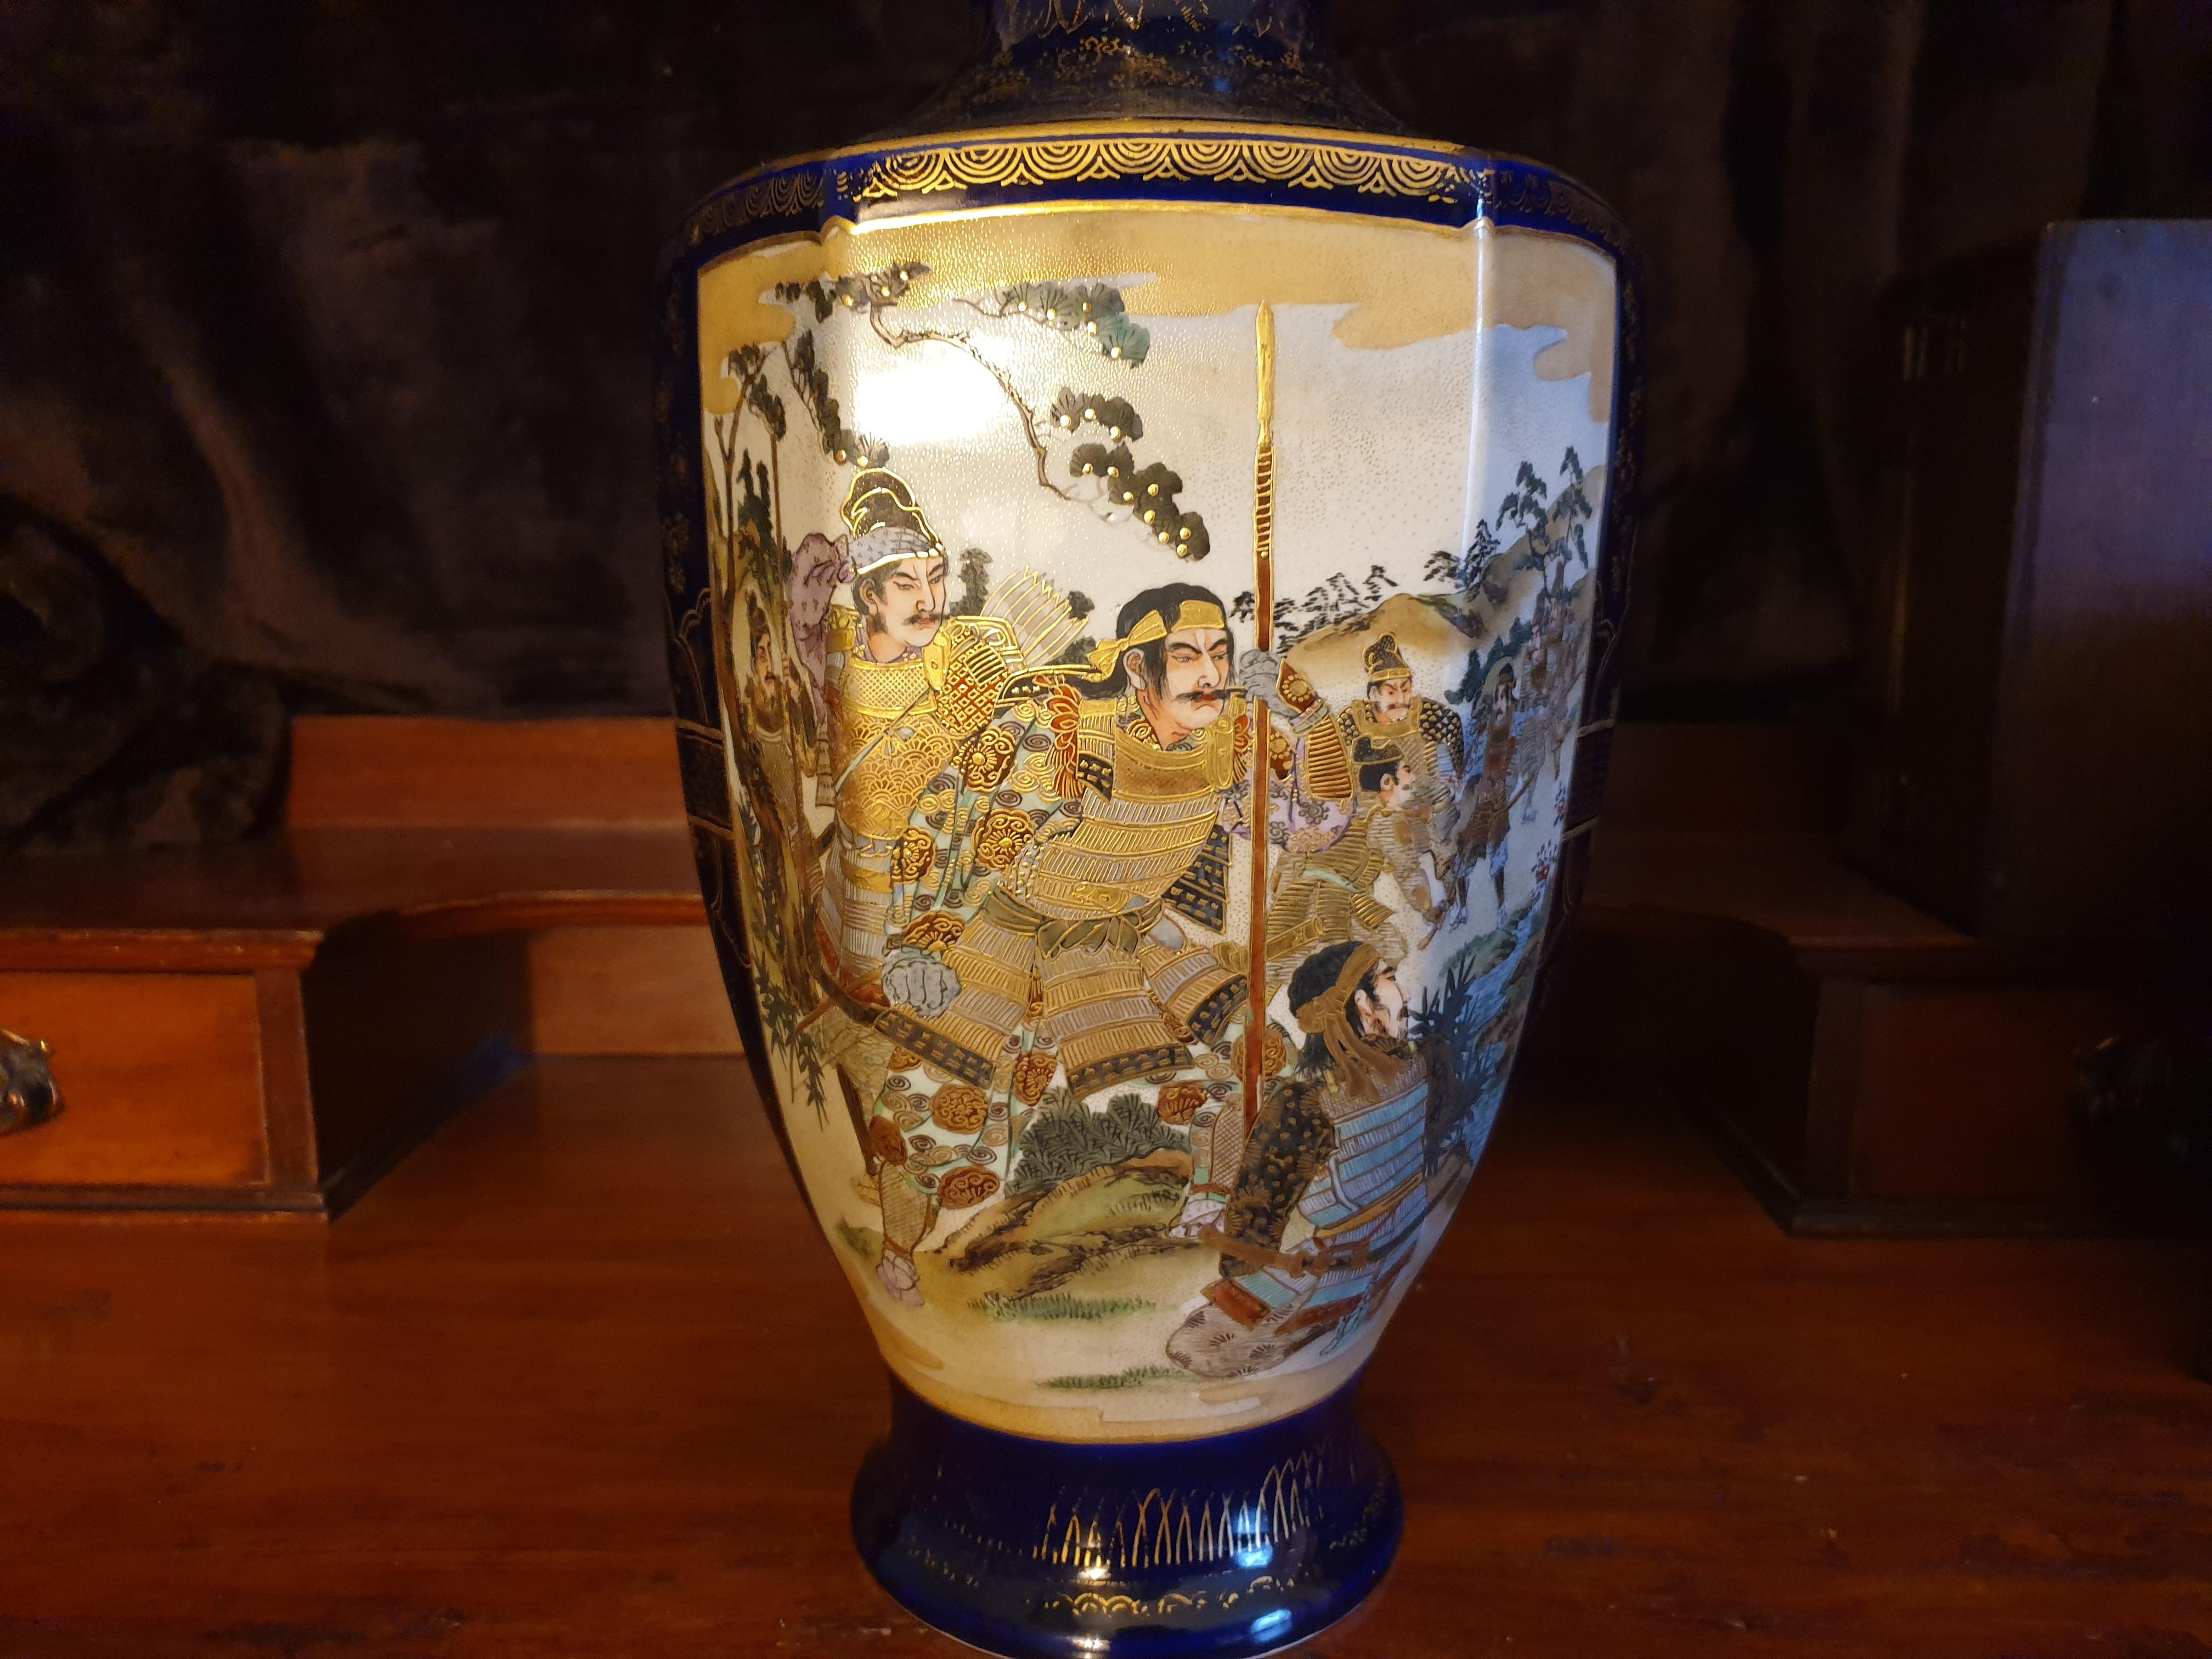 Porcelain Meiji Period Pair of Japanese Satsuma Vases 19th Century With Imperial Scenes  For Sale